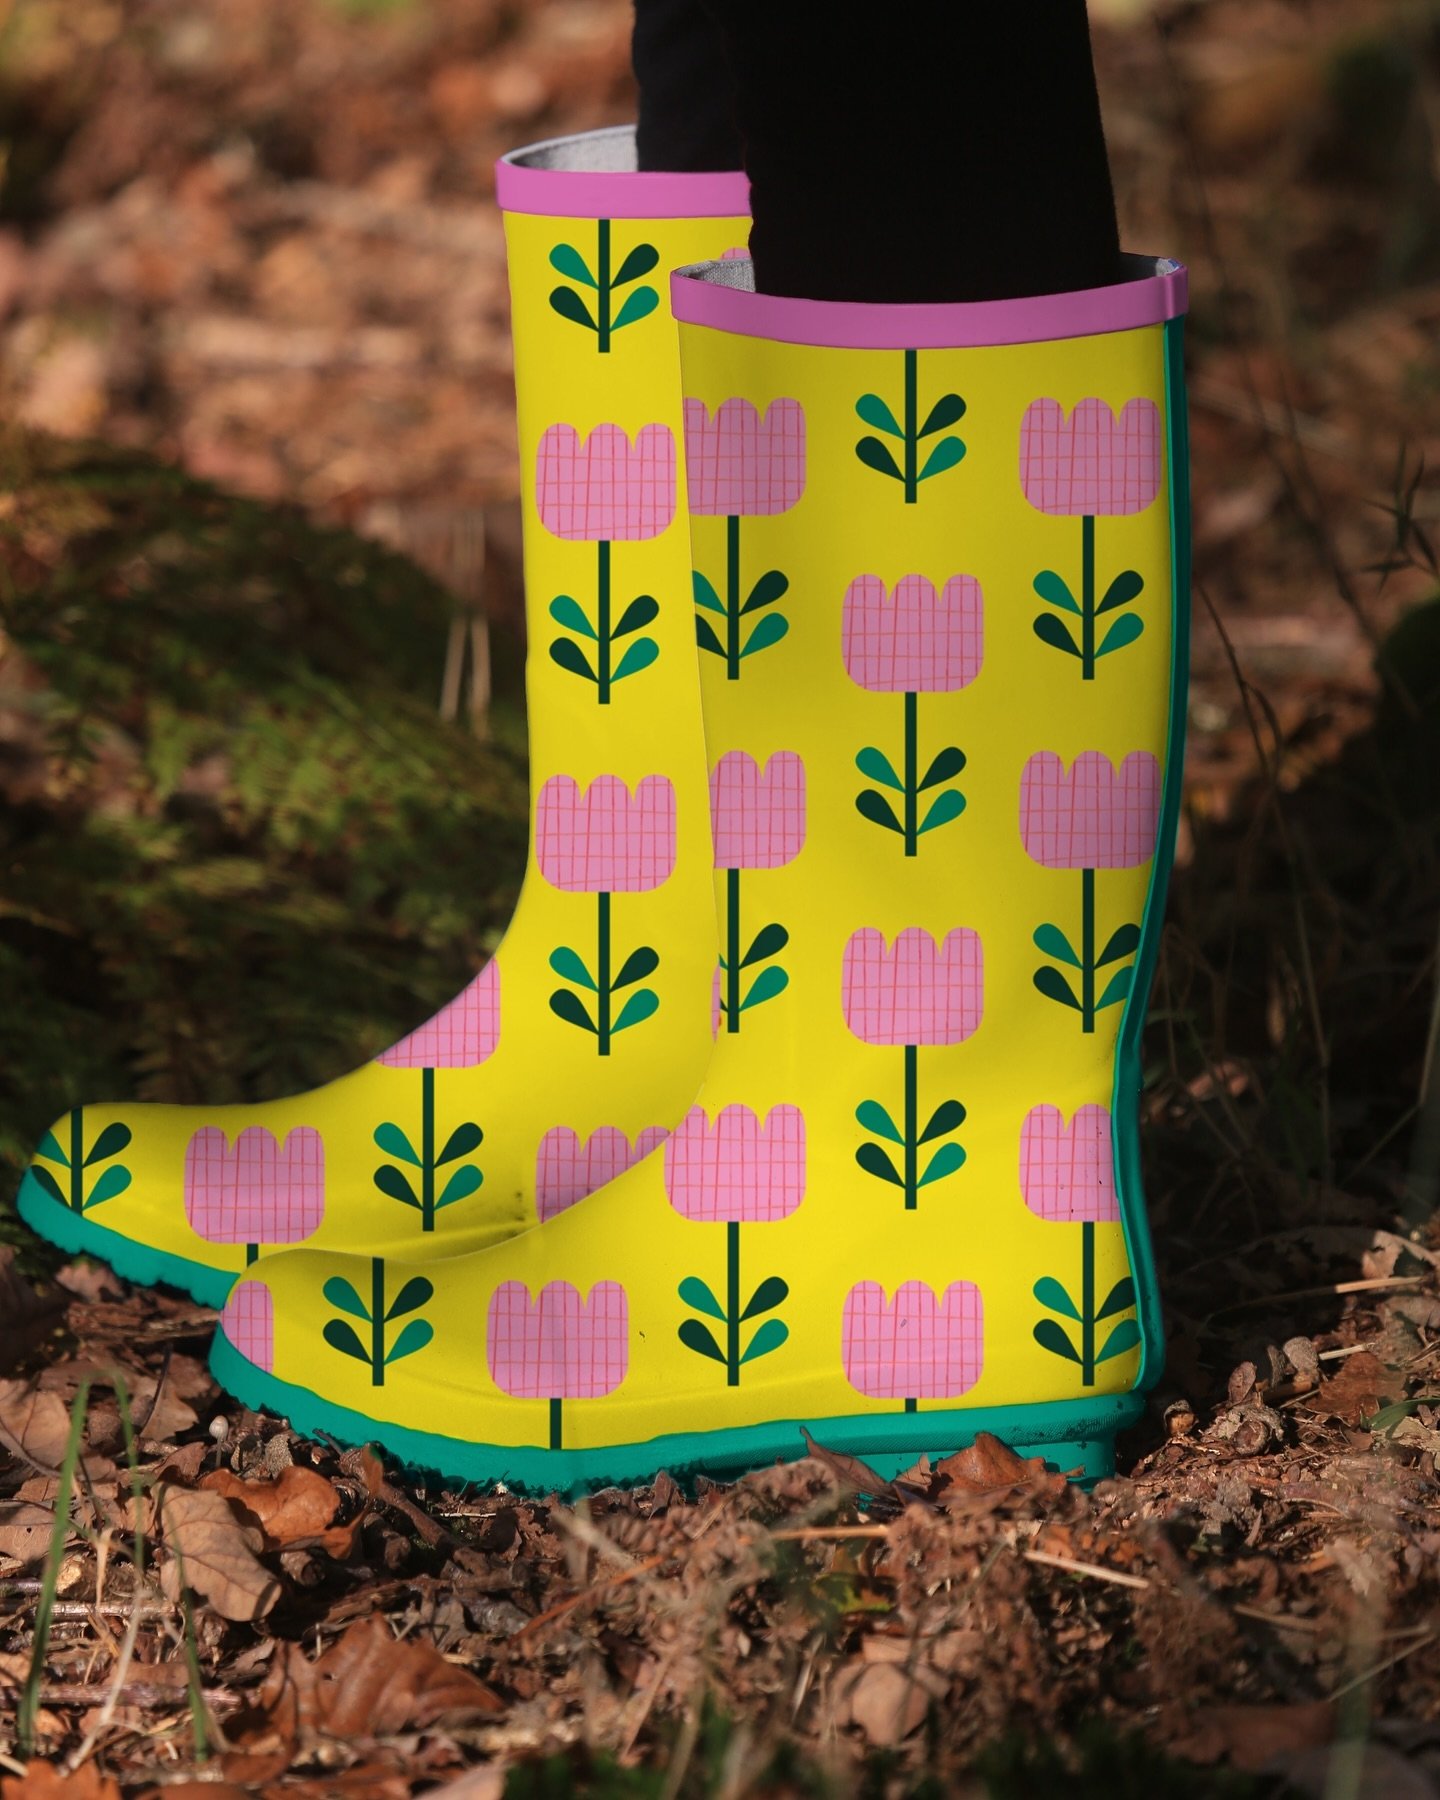 Wellies mockup with my hatched flowers pattern in sunny yellow 😎 ☀️ ☔️ 🌷 The pink and green trim on the boots were part of the original mockup&mdash;matches perfectly with this colourway ✨ 

Thanks @bekkiflaherty for the mockup template 🙏
.
.
.
#m